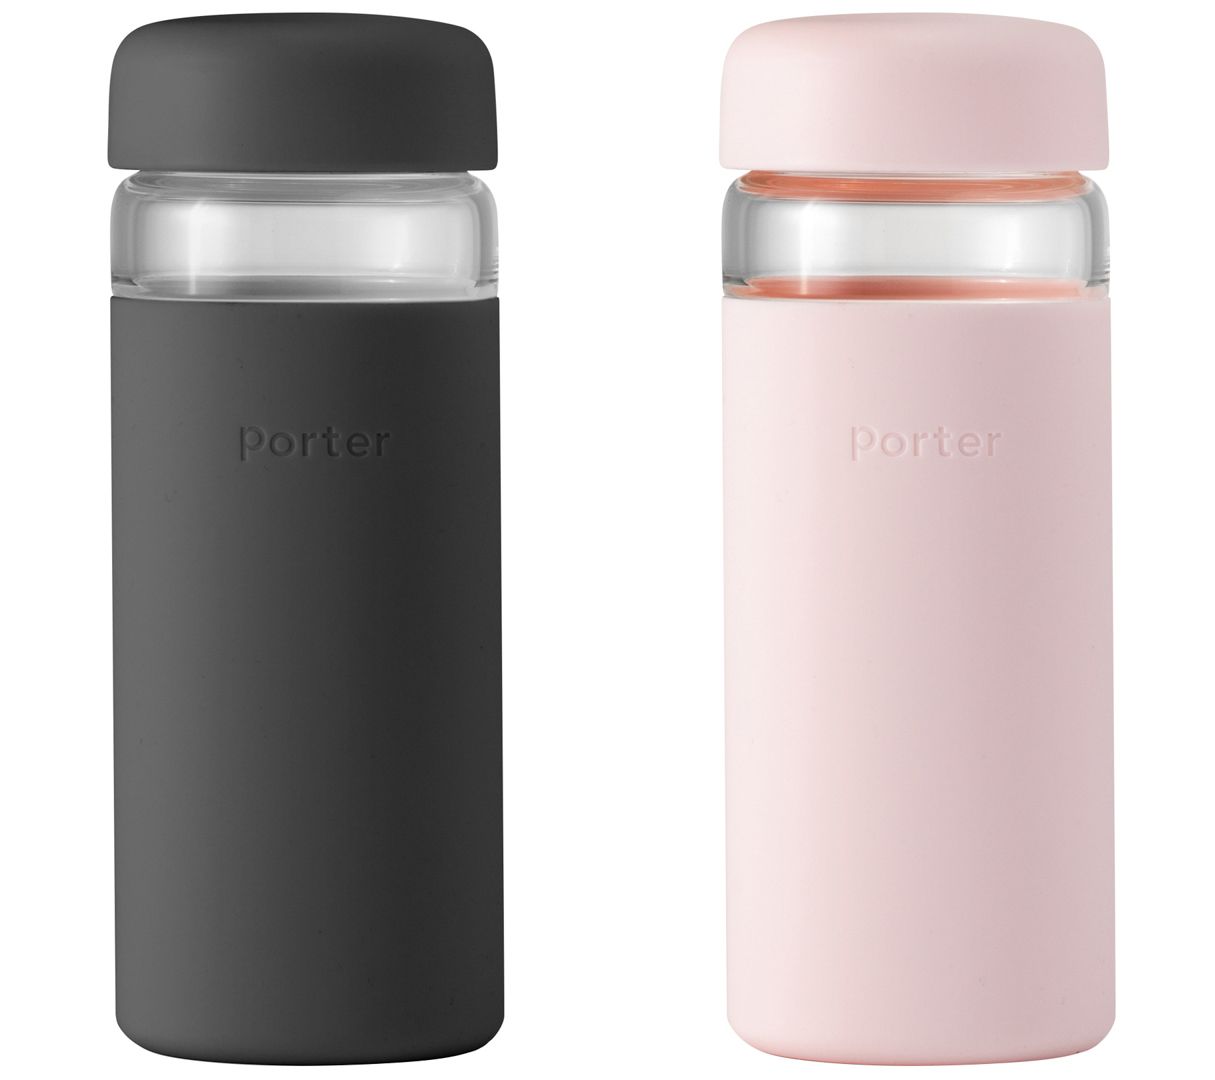 JoyJolt Spring Glass Insulated Water Bottles with Stainless Steel Cap - Set  of 6